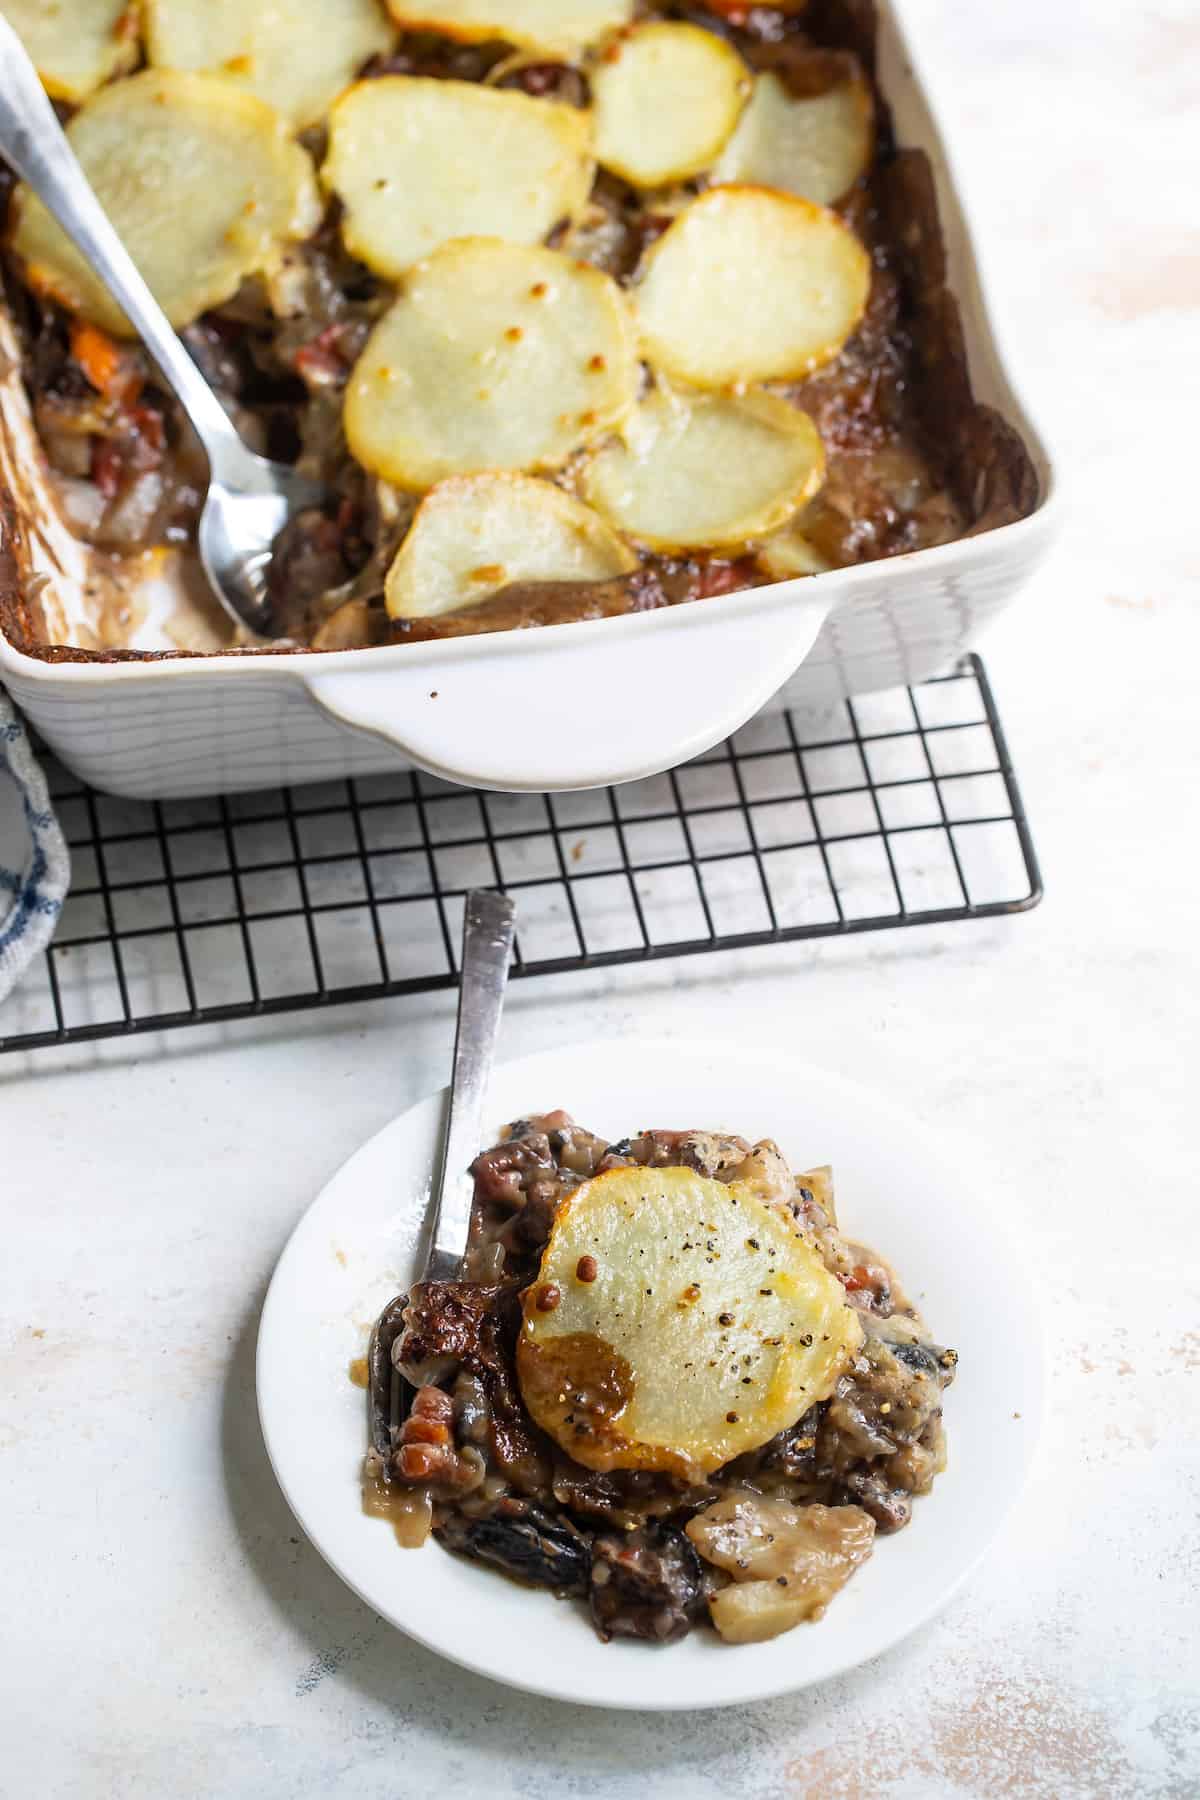 A Serving of Vegetable Moussaka on a Plate with a Pan of Moussaka Behind It